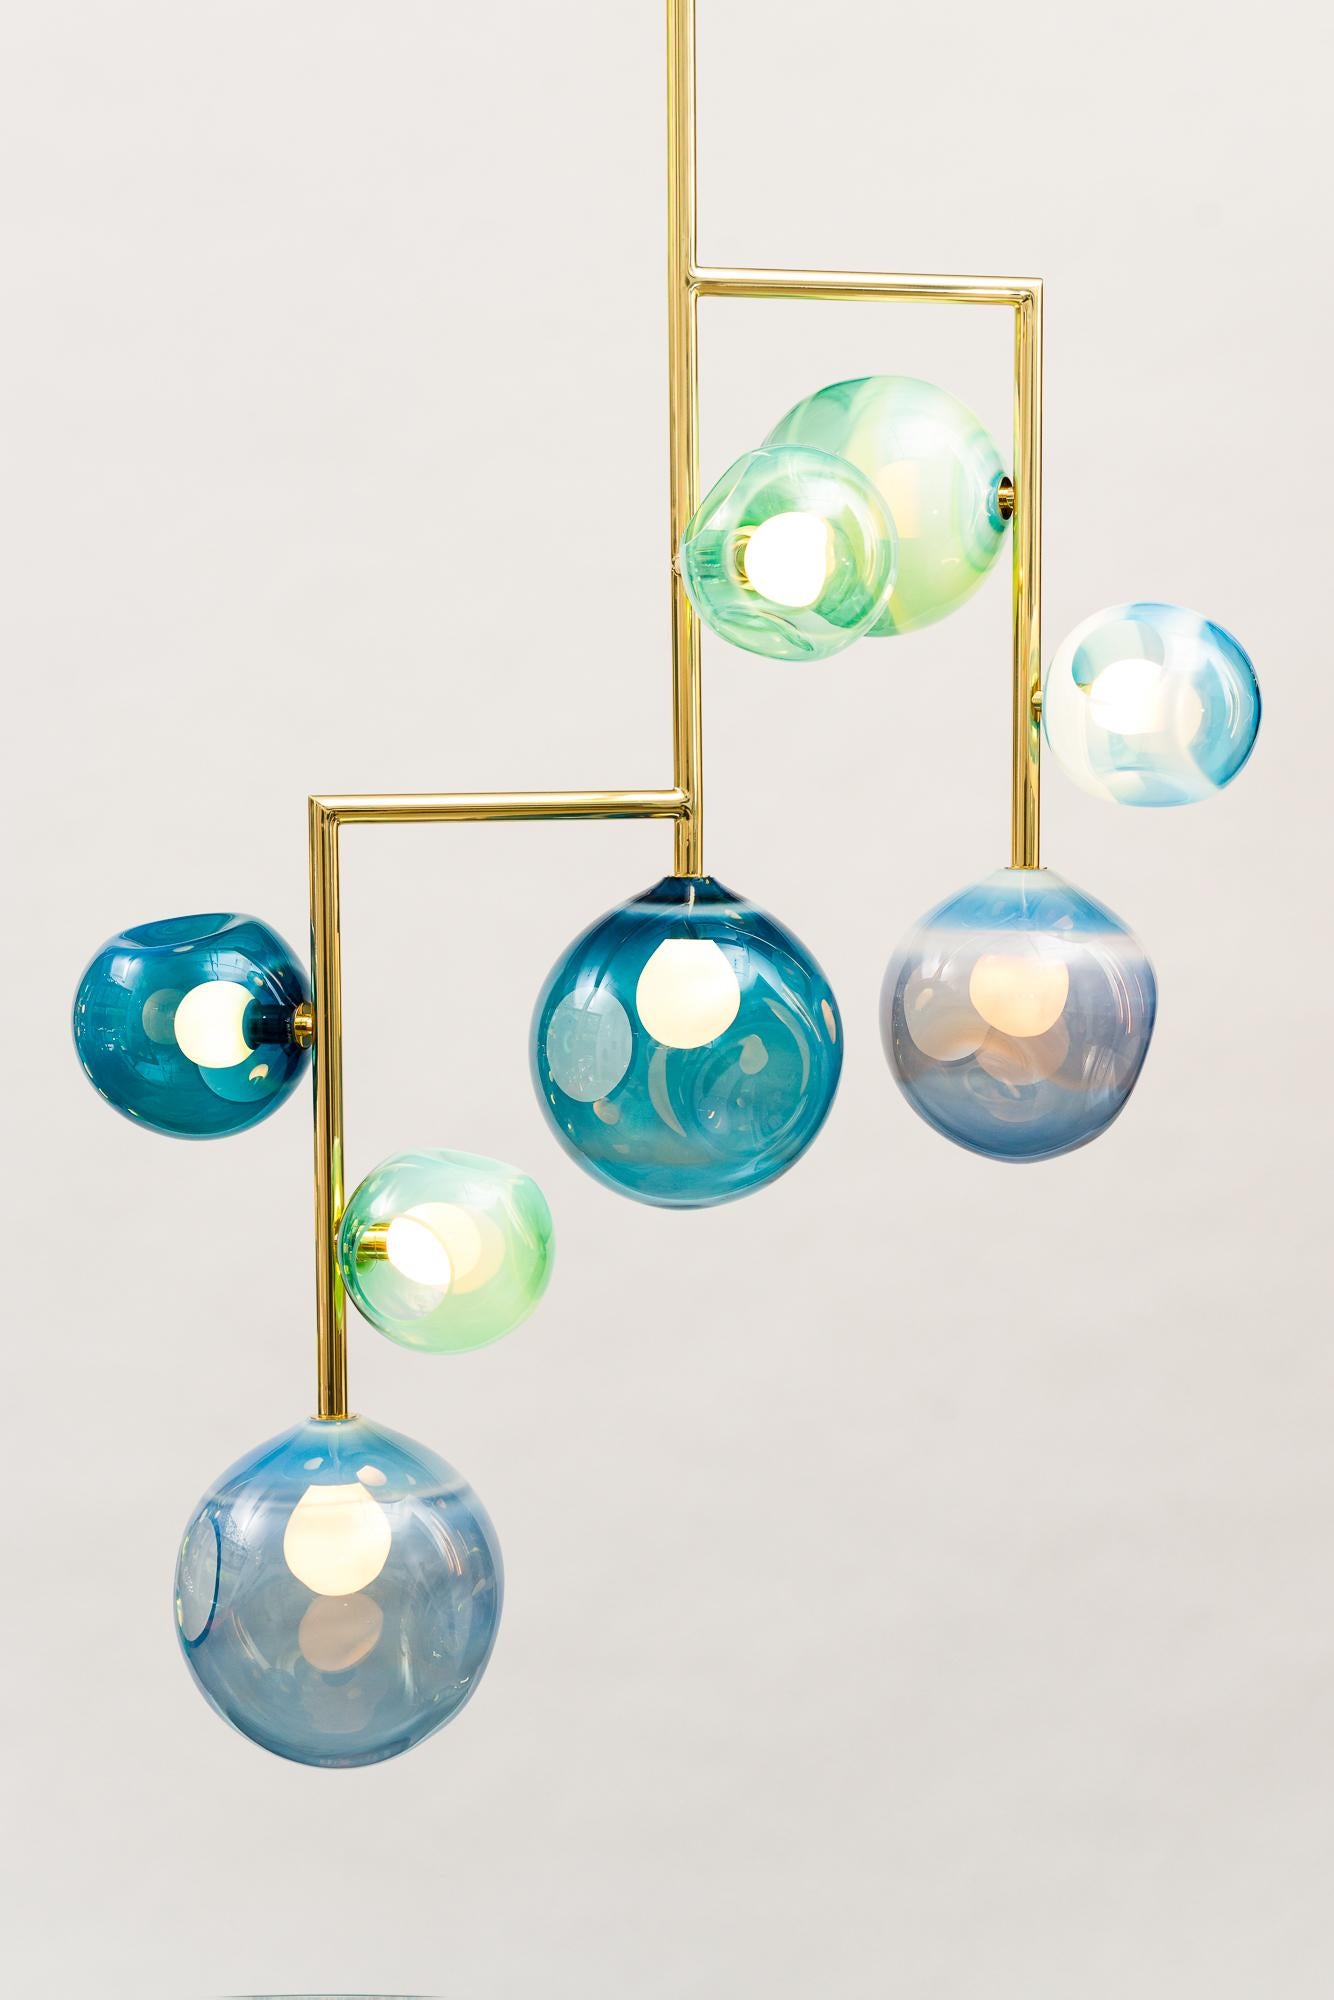 Today in addition to his fine art glass sculptures, Jamie Harris is creating unique, hand-made sculptural lighting. Drawing on the contrast between rigid, geometric metal structures and organic, hand-made glass forms, his chandeliers achieve a